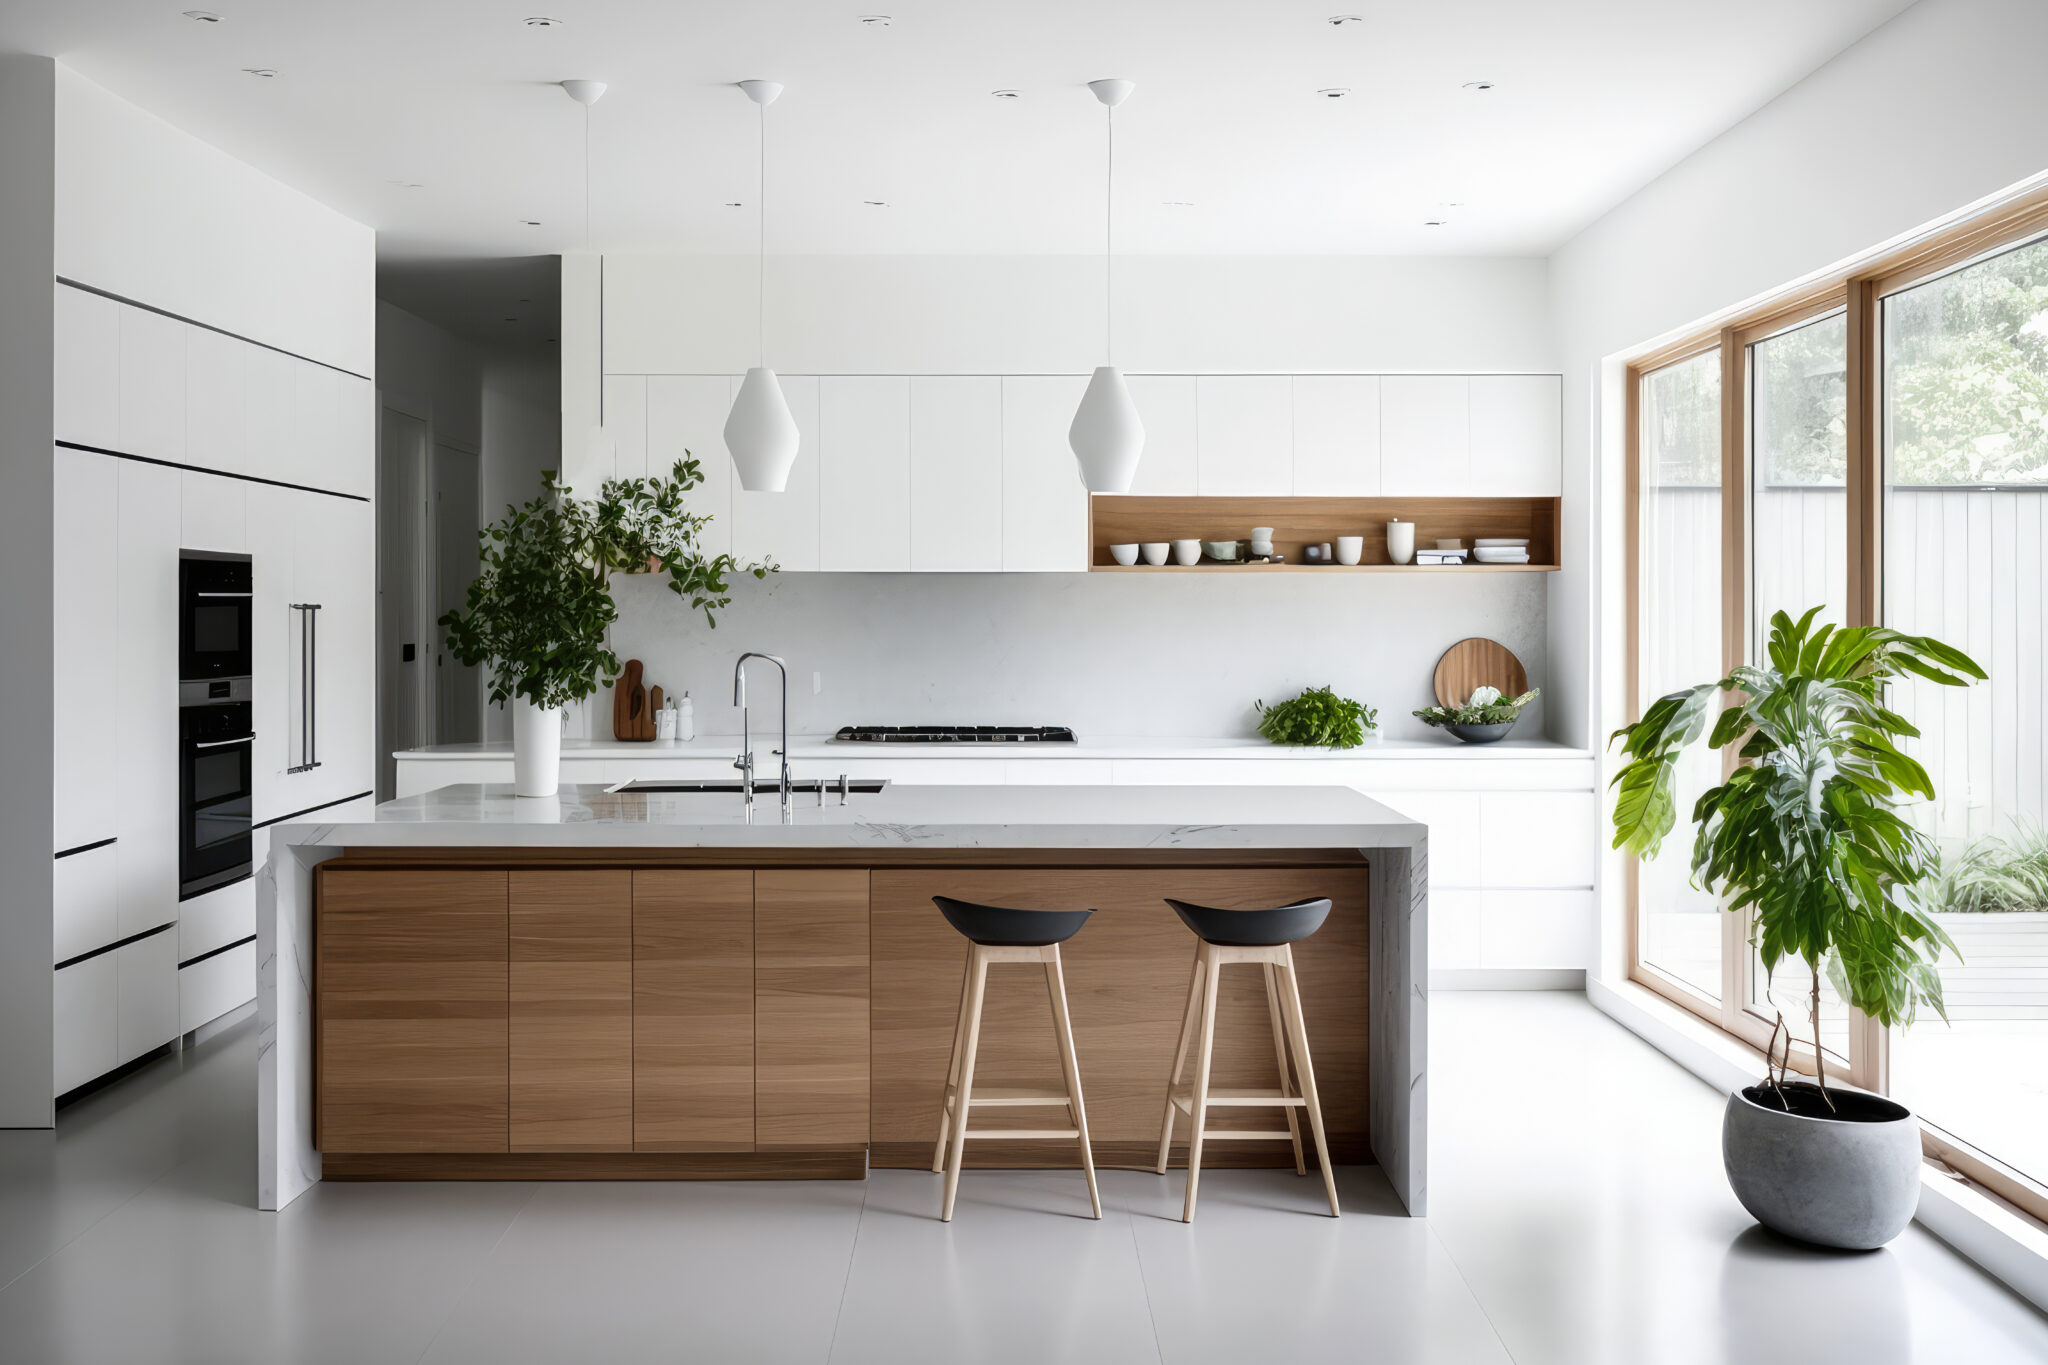 Timeless minimalist kitchen design with a wooden island and whit